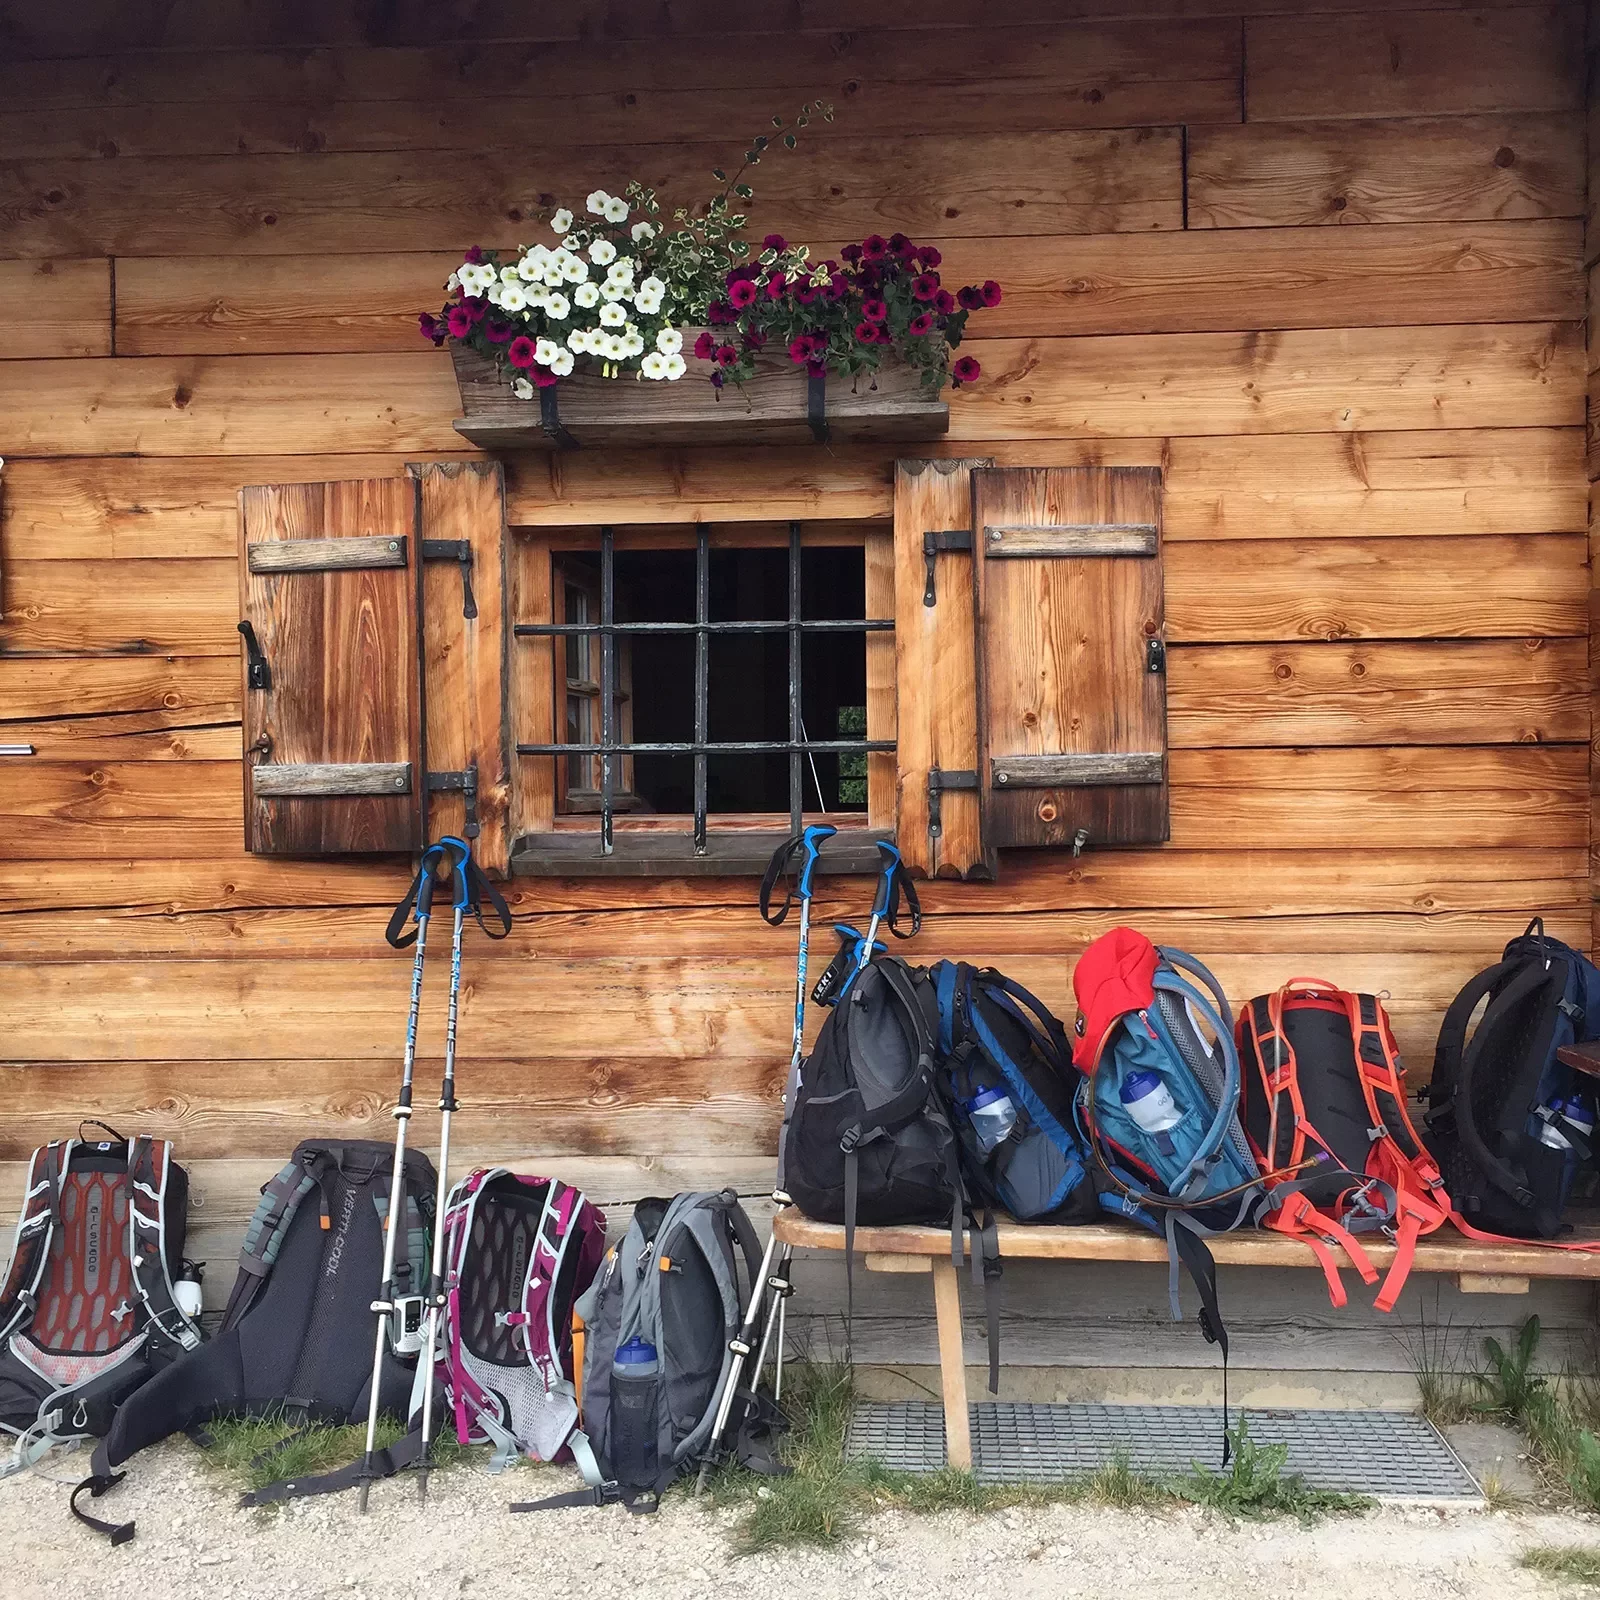 Hiking backpacks piled in front of log cabin.